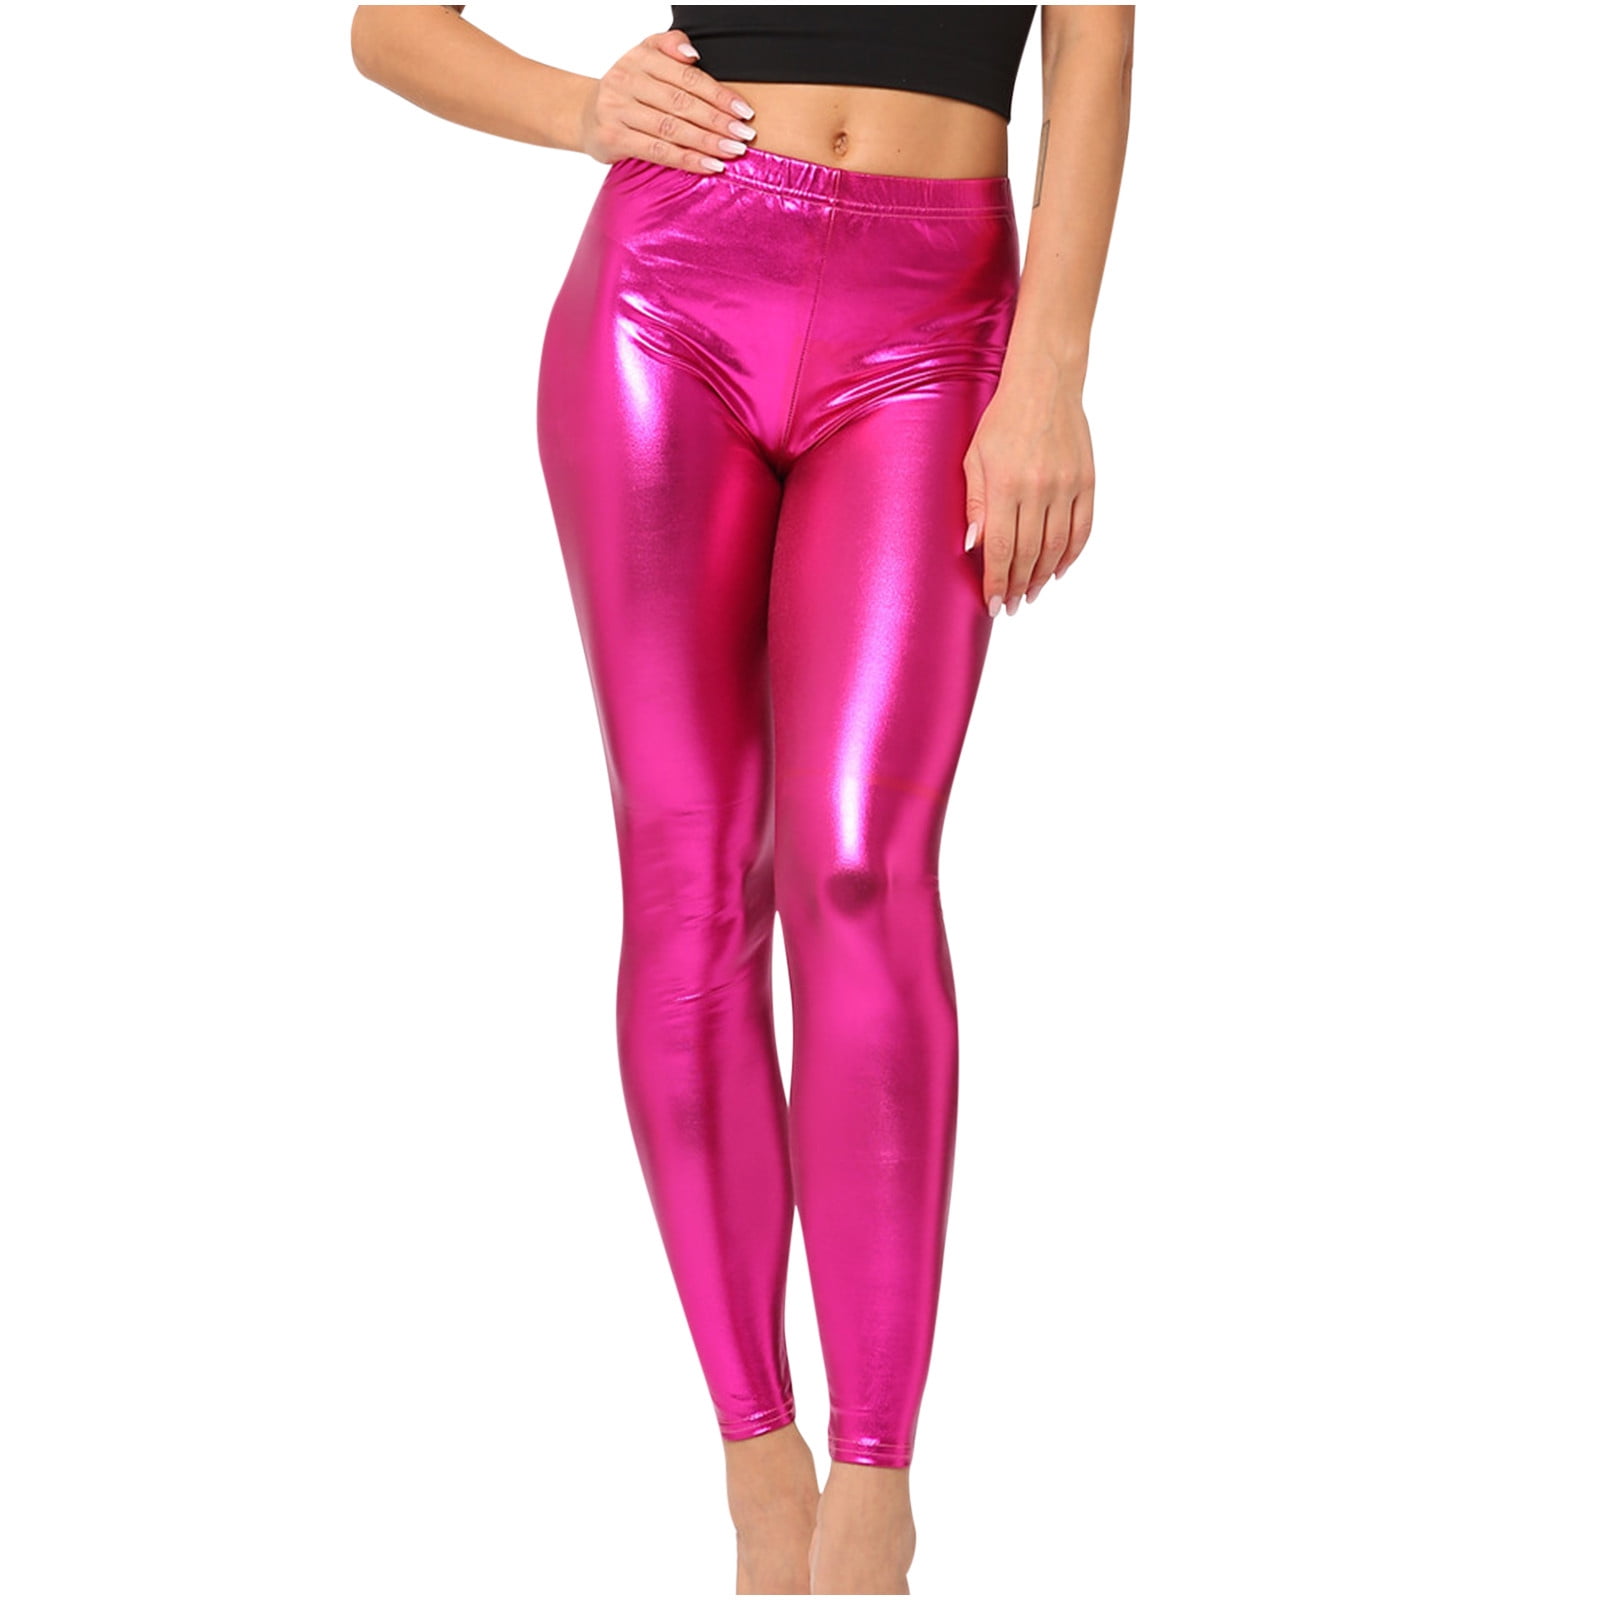 Sparkly Leather Leggings for Women, Trendy High Waisted Shiny Sexy